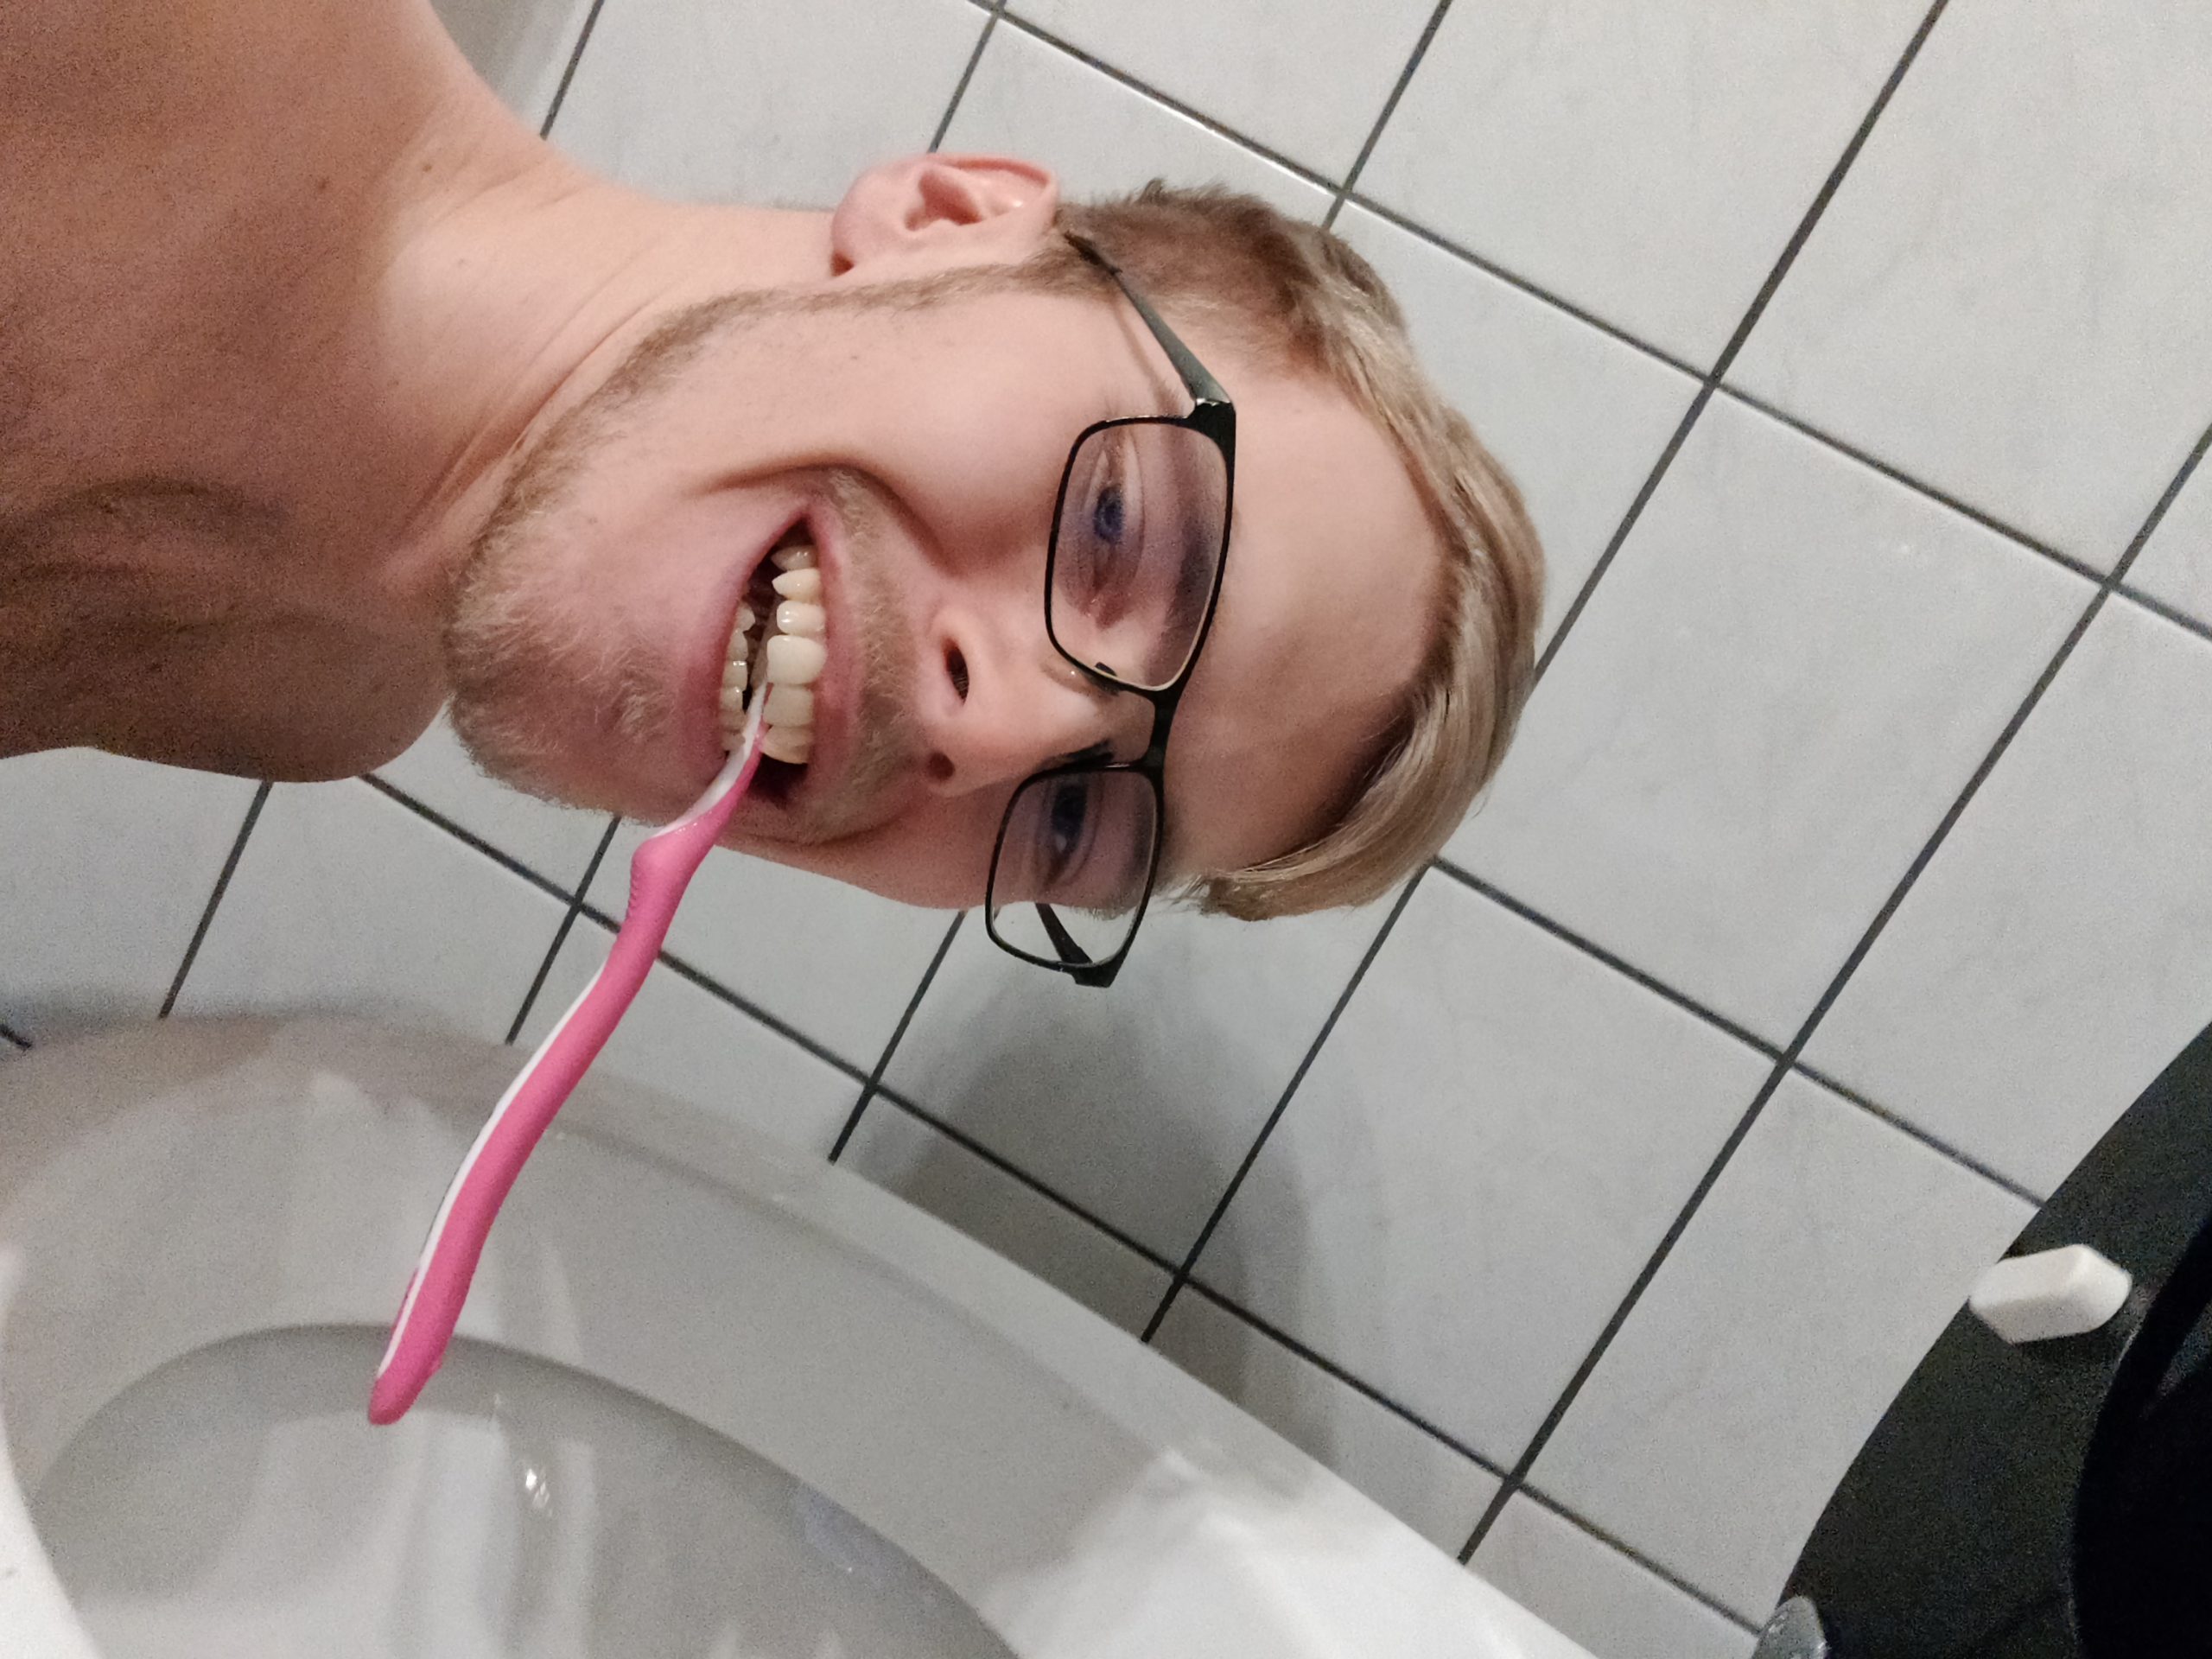 Mouthful of dirty toilet